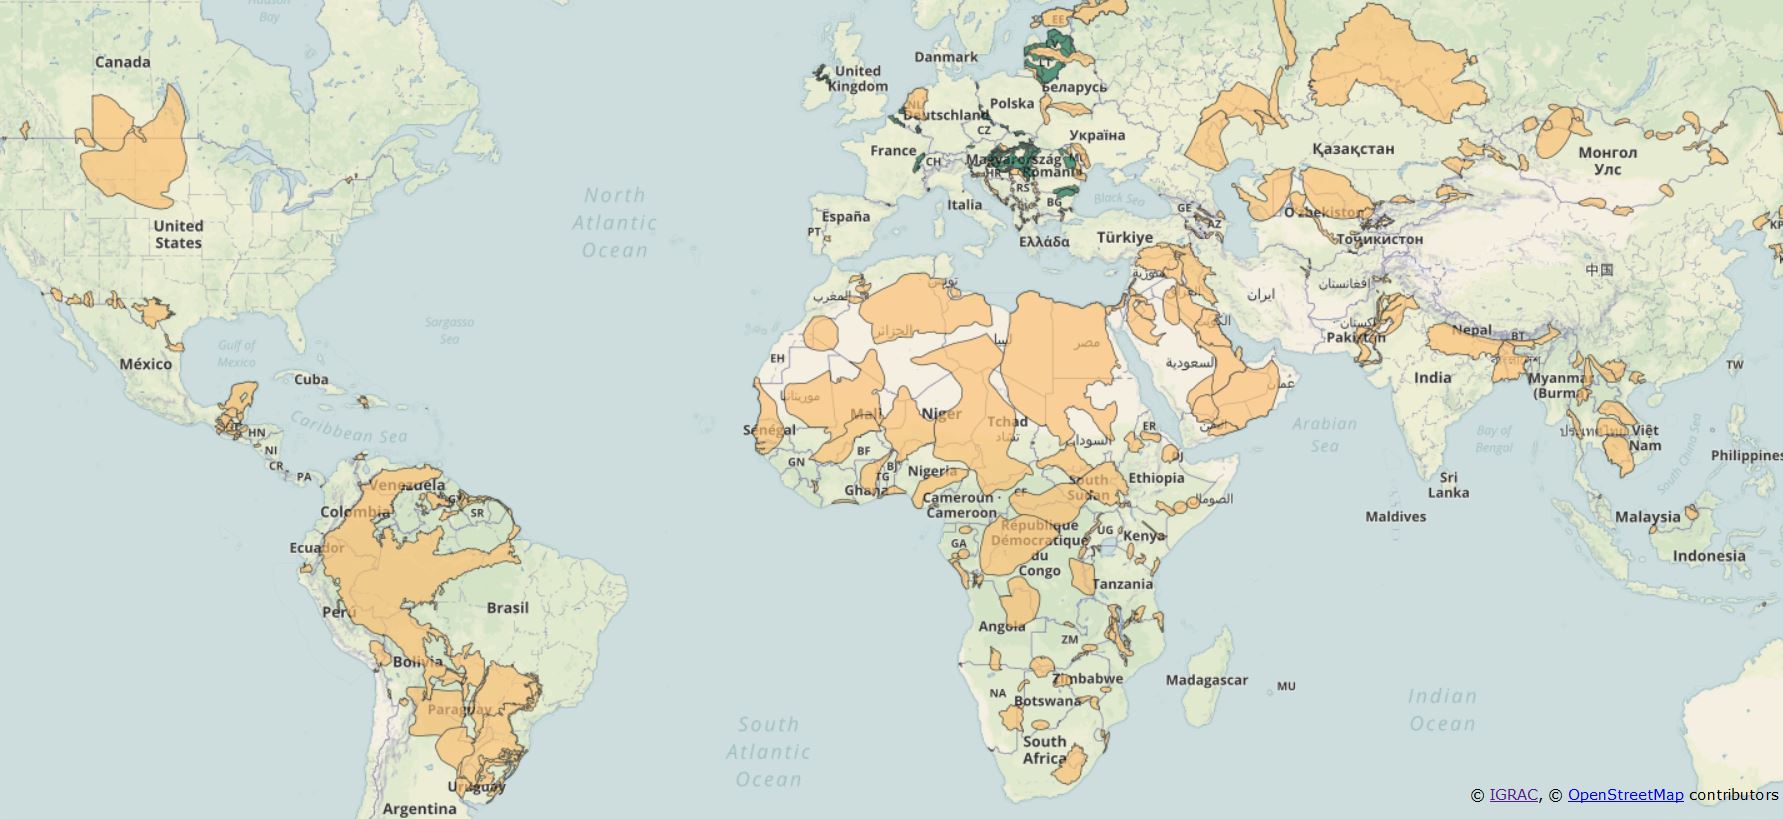 IGRAC's transboundary aquifer map shows that nearly every country shares a groundwater basin with a neighbor. For an interactive version of the map, click here.